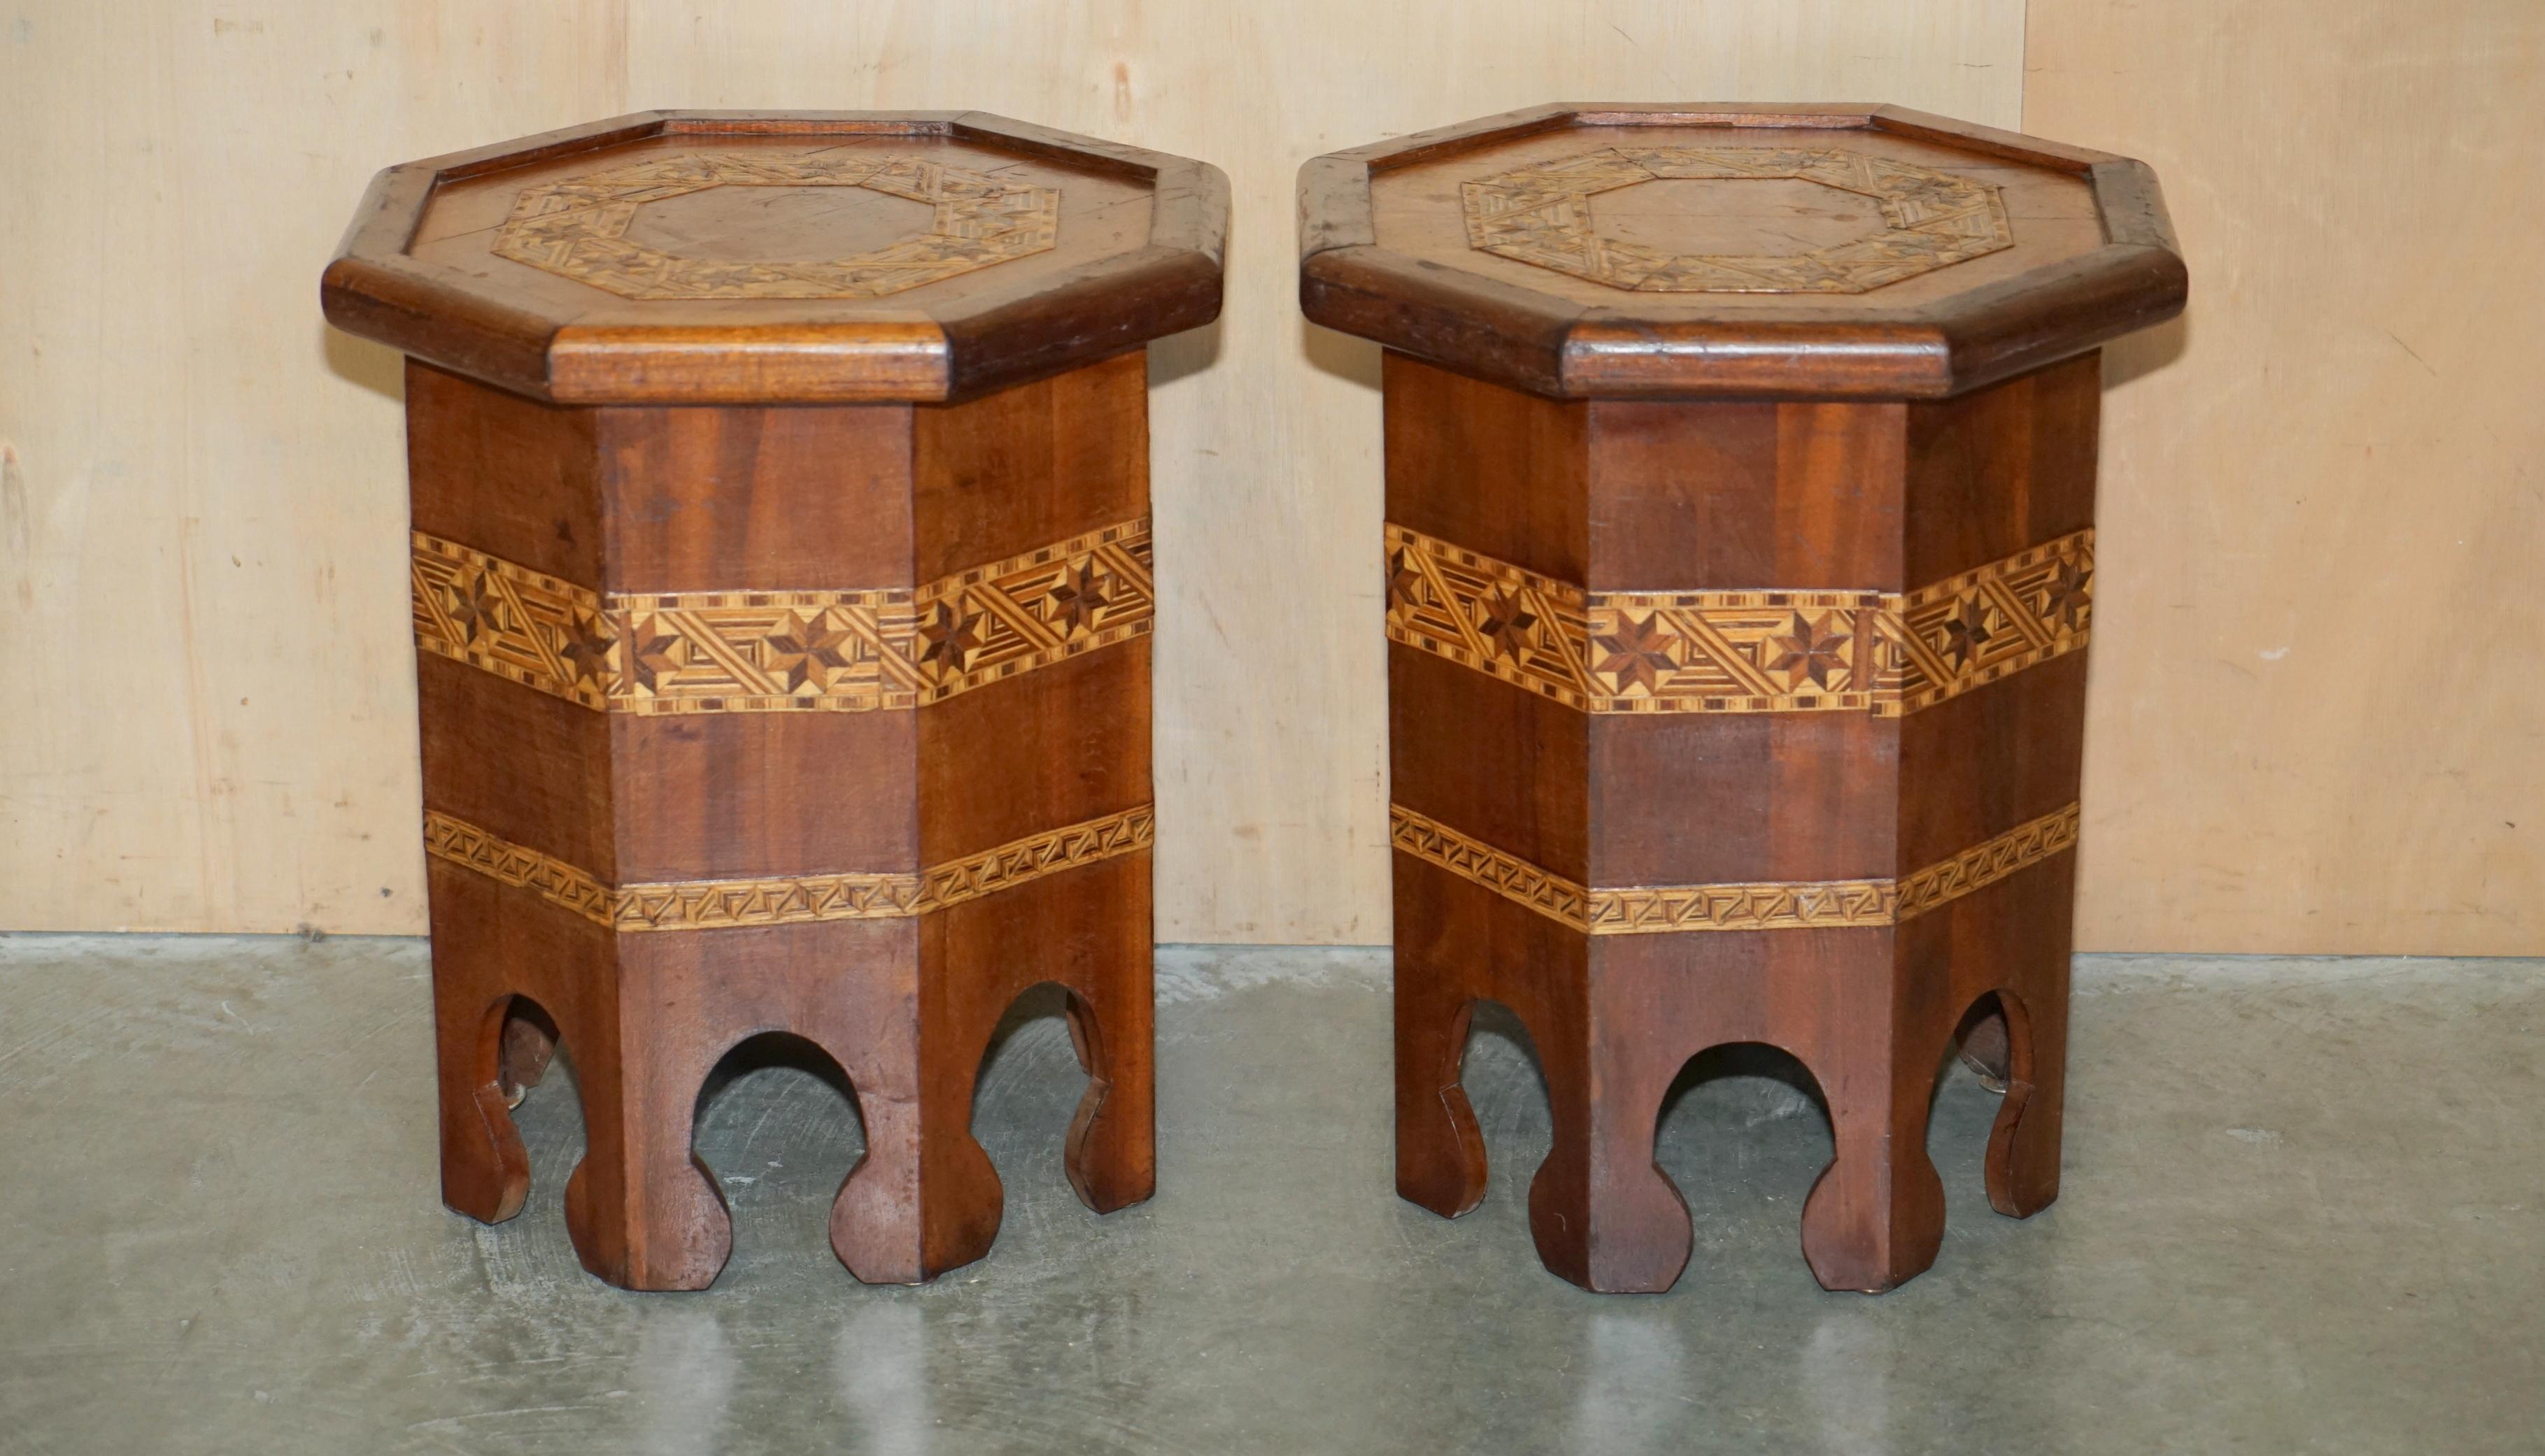 Royal House Antiques

Royal House Antiques is delighted to offer for sale this very collectable pair of Liberty's London retailed Moroccan inlaid side tables 

Please note the delivery fee listed is just a guide, it covers within the M25 only for